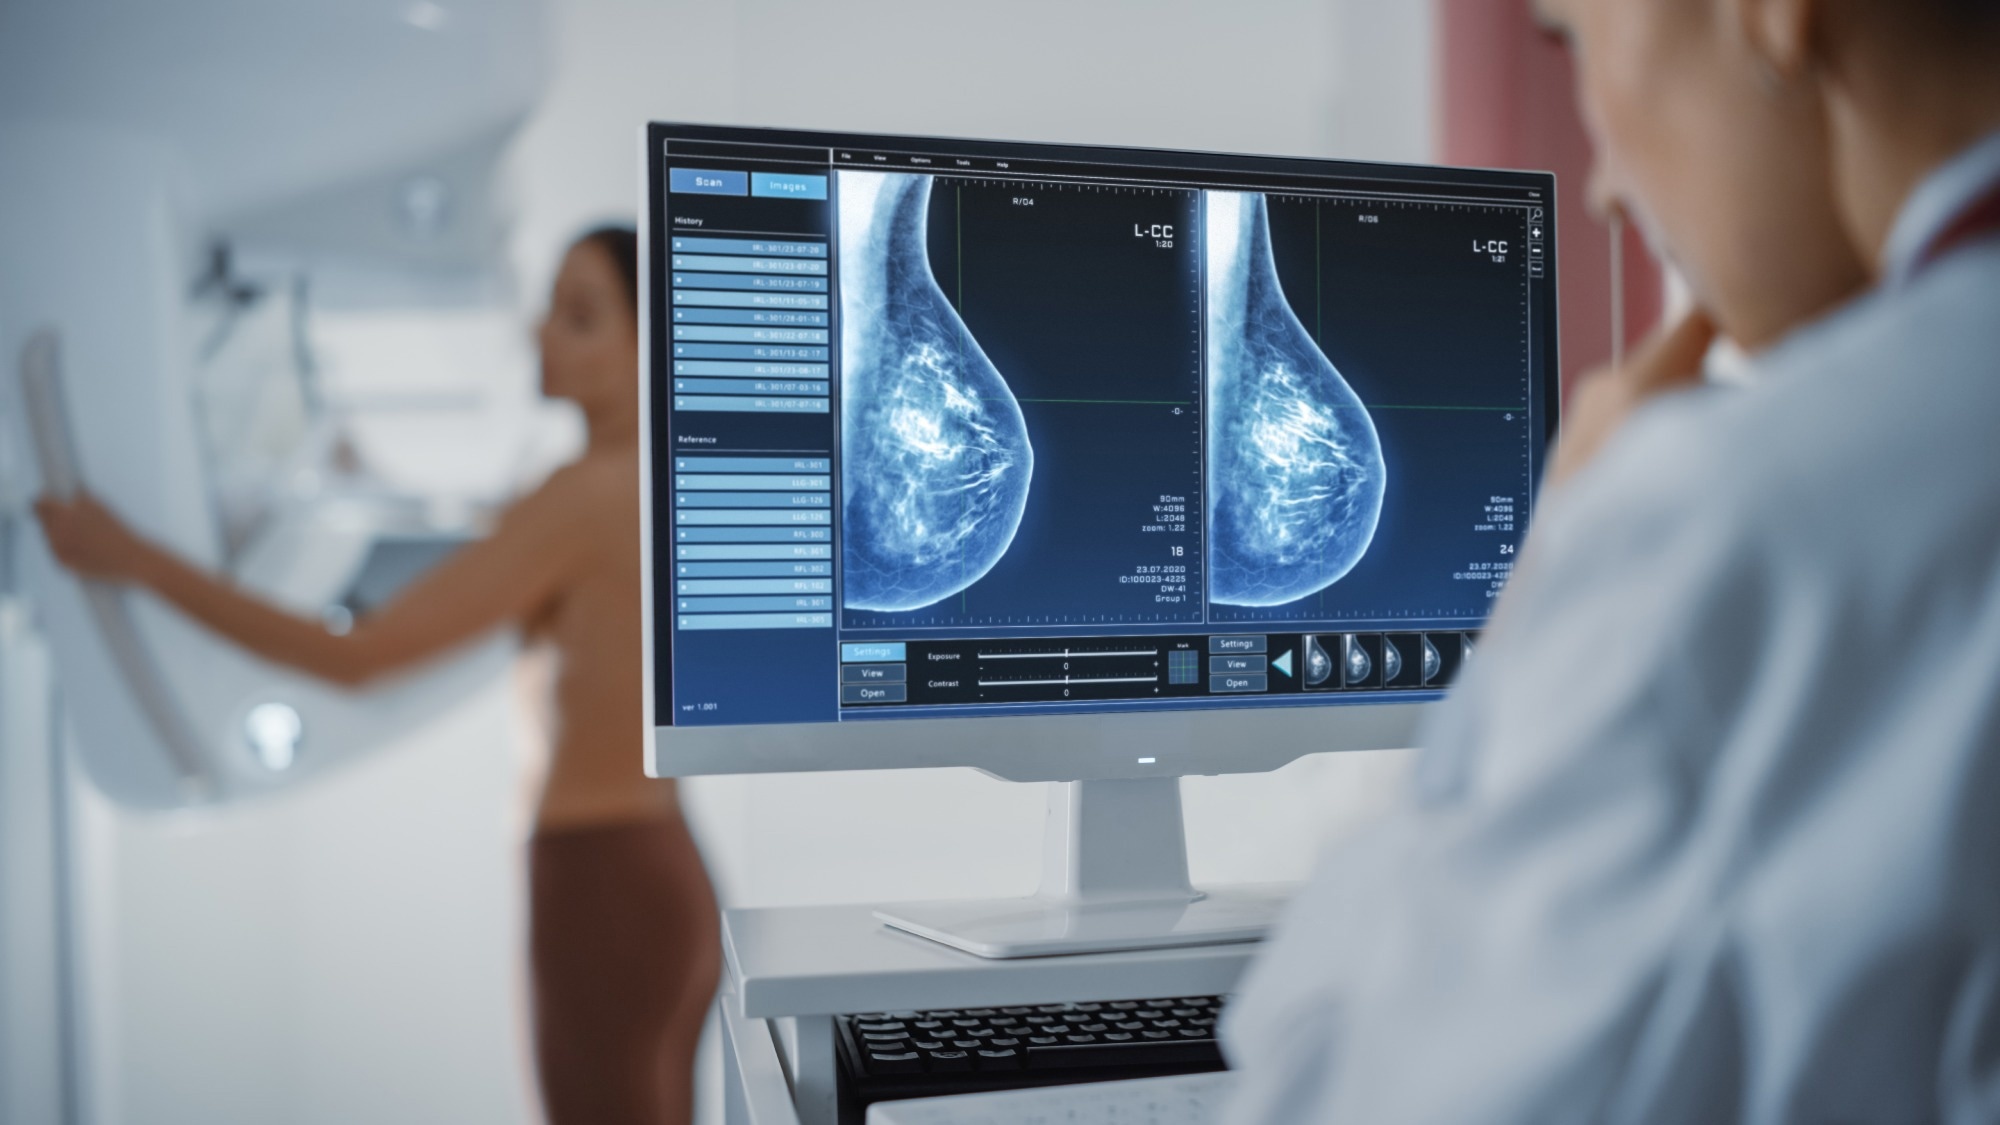 Study: Omitting Radiotherapy after Breast-Conserving Surgery in Luminal A Breast Cancer. Image Credit: Gorodenkoff/Shutterstock.com